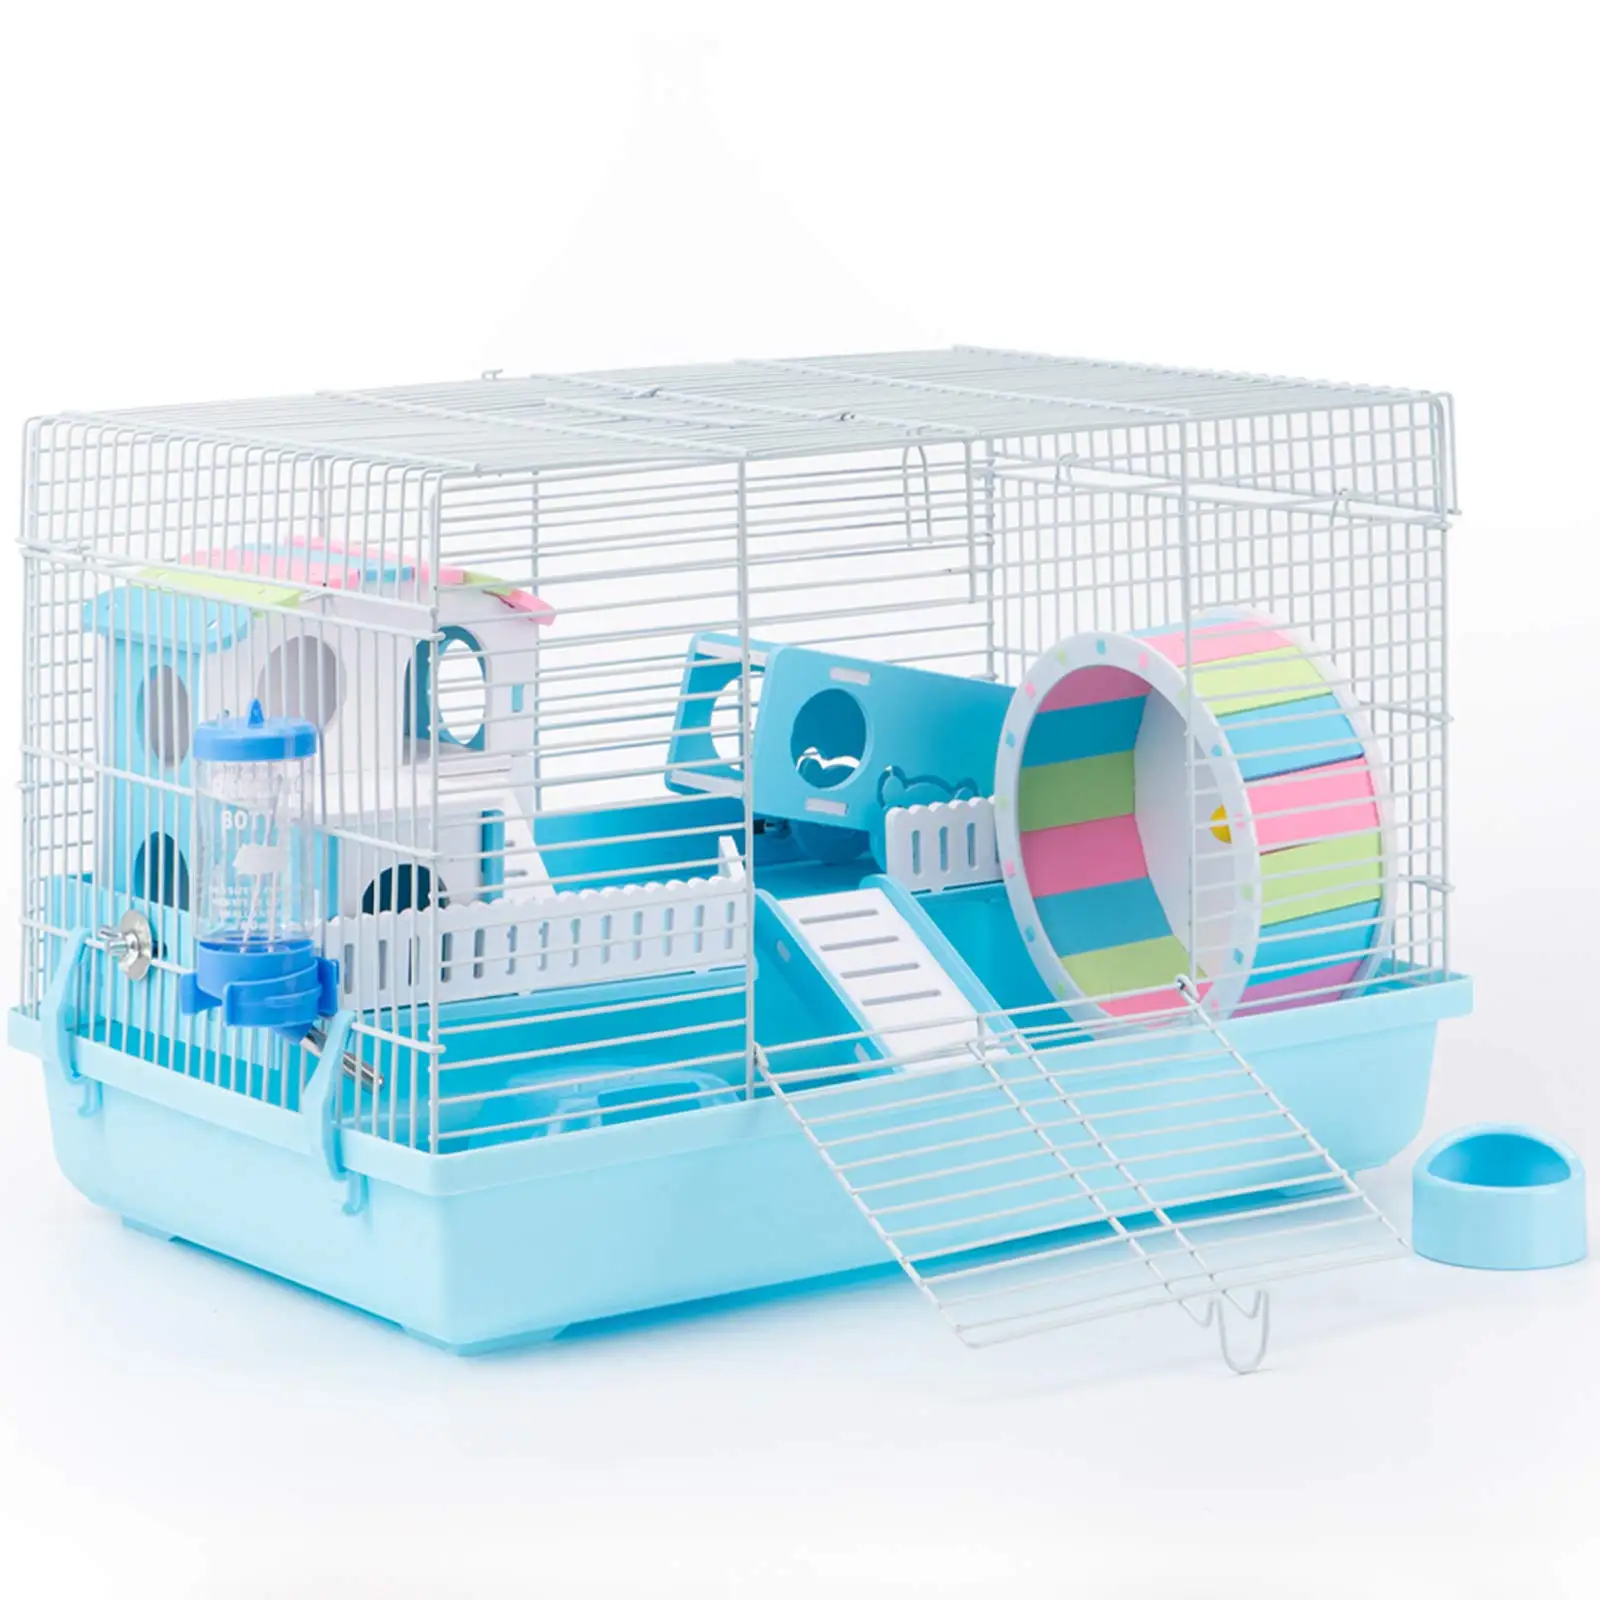 Mewoofun Large Hamster Cage 4 Models Gerbil Matel Safe PP Small Animal Cage Exercise Wired Haven